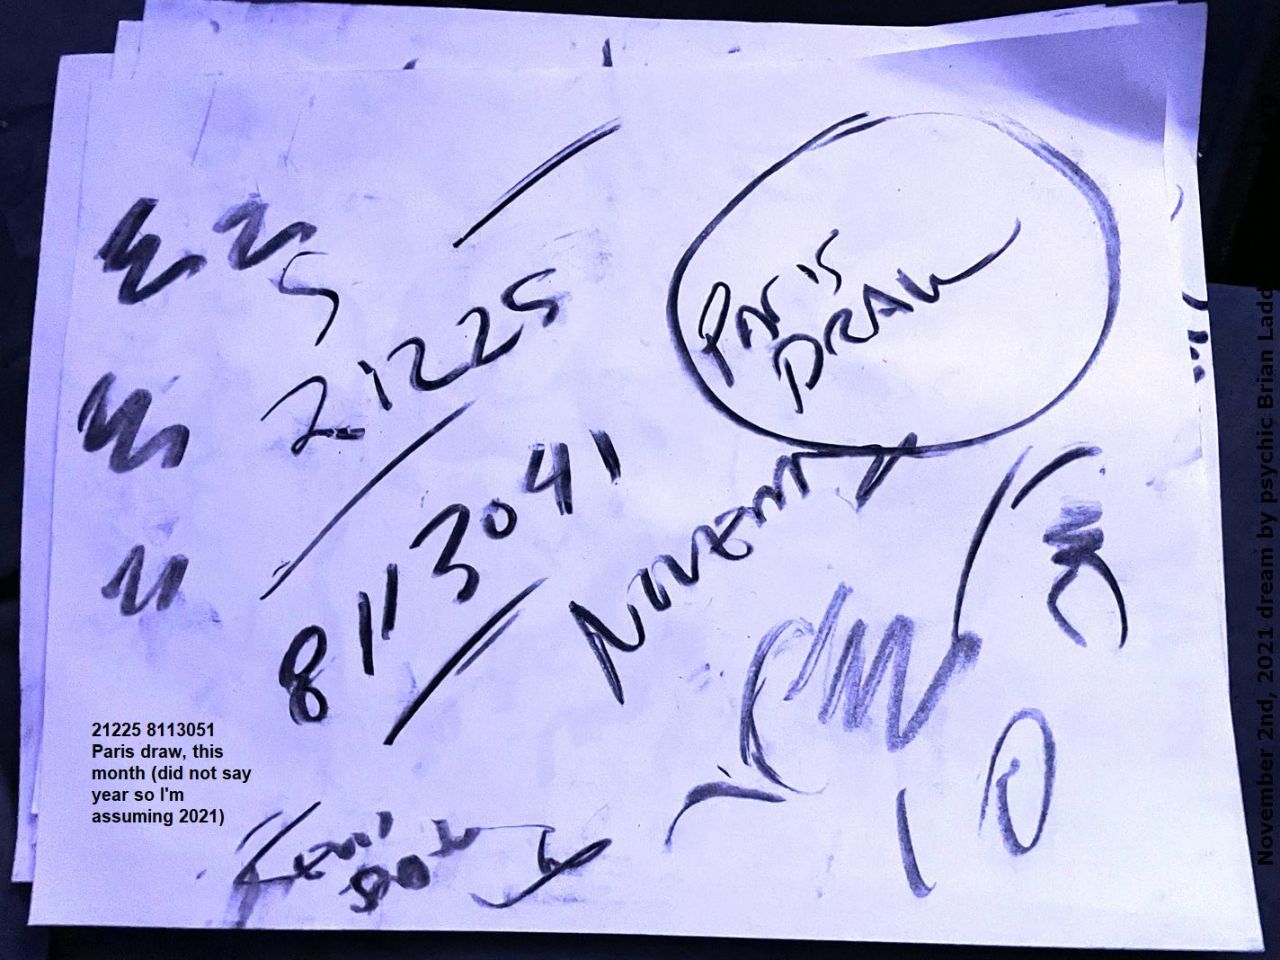 2 Nov 2021 7  21225 8113051 Paris draw, this month (did not say year so I'm assuming 2021)
21225 8113051 Paris draw, this month (did not say year so I'm assuming 2021)

